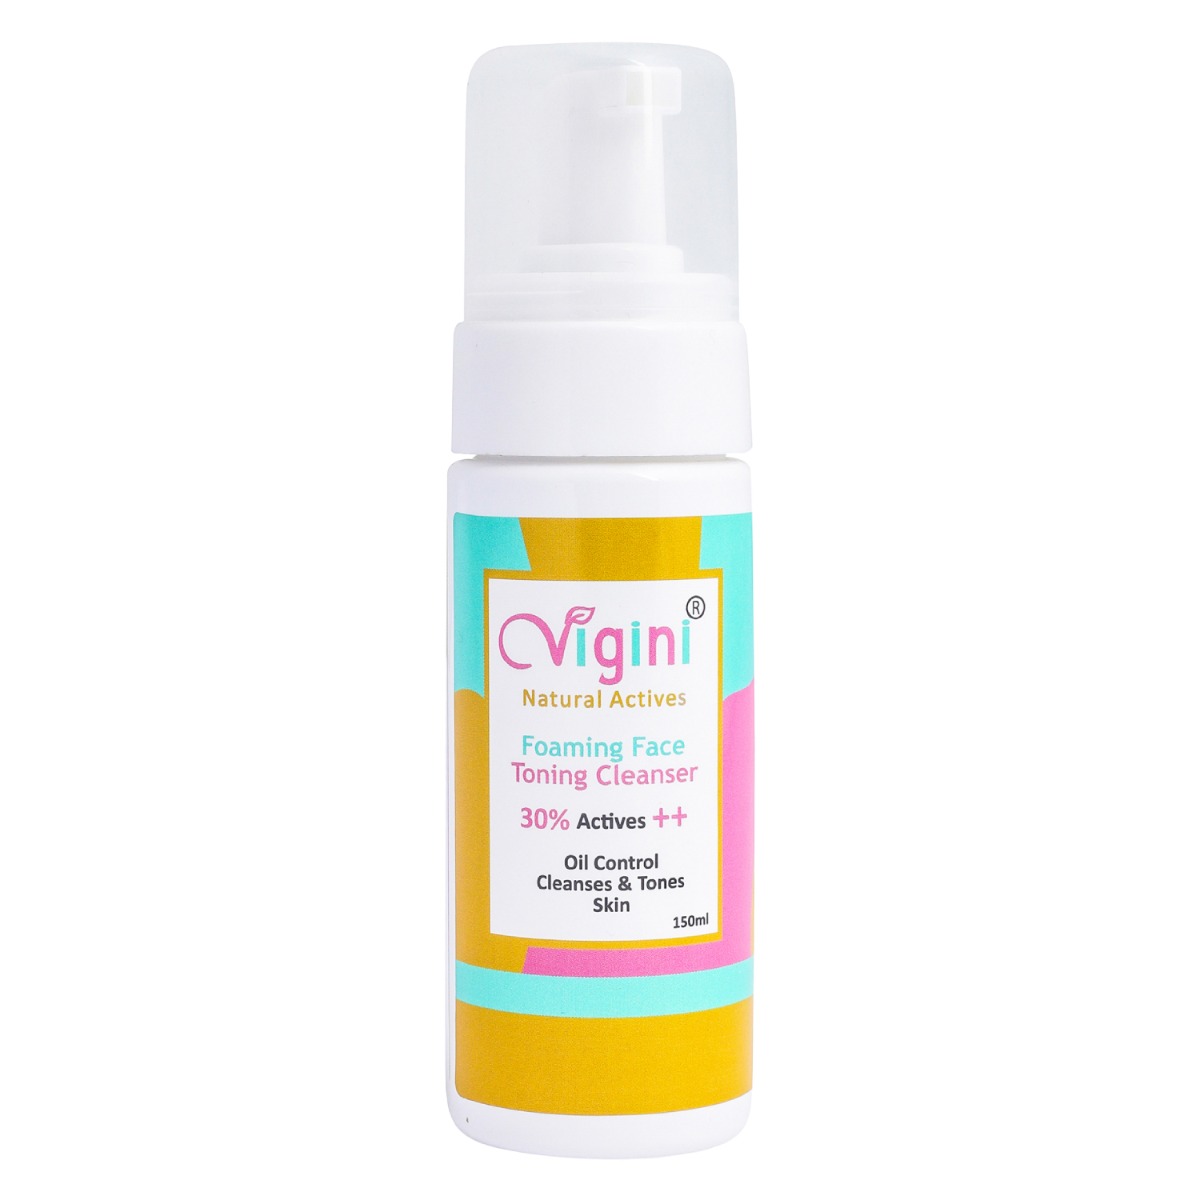 Vigini 30% Actives Anti-Acne Oil Control Foaming Toning Cleanser Face Wash, 150ml